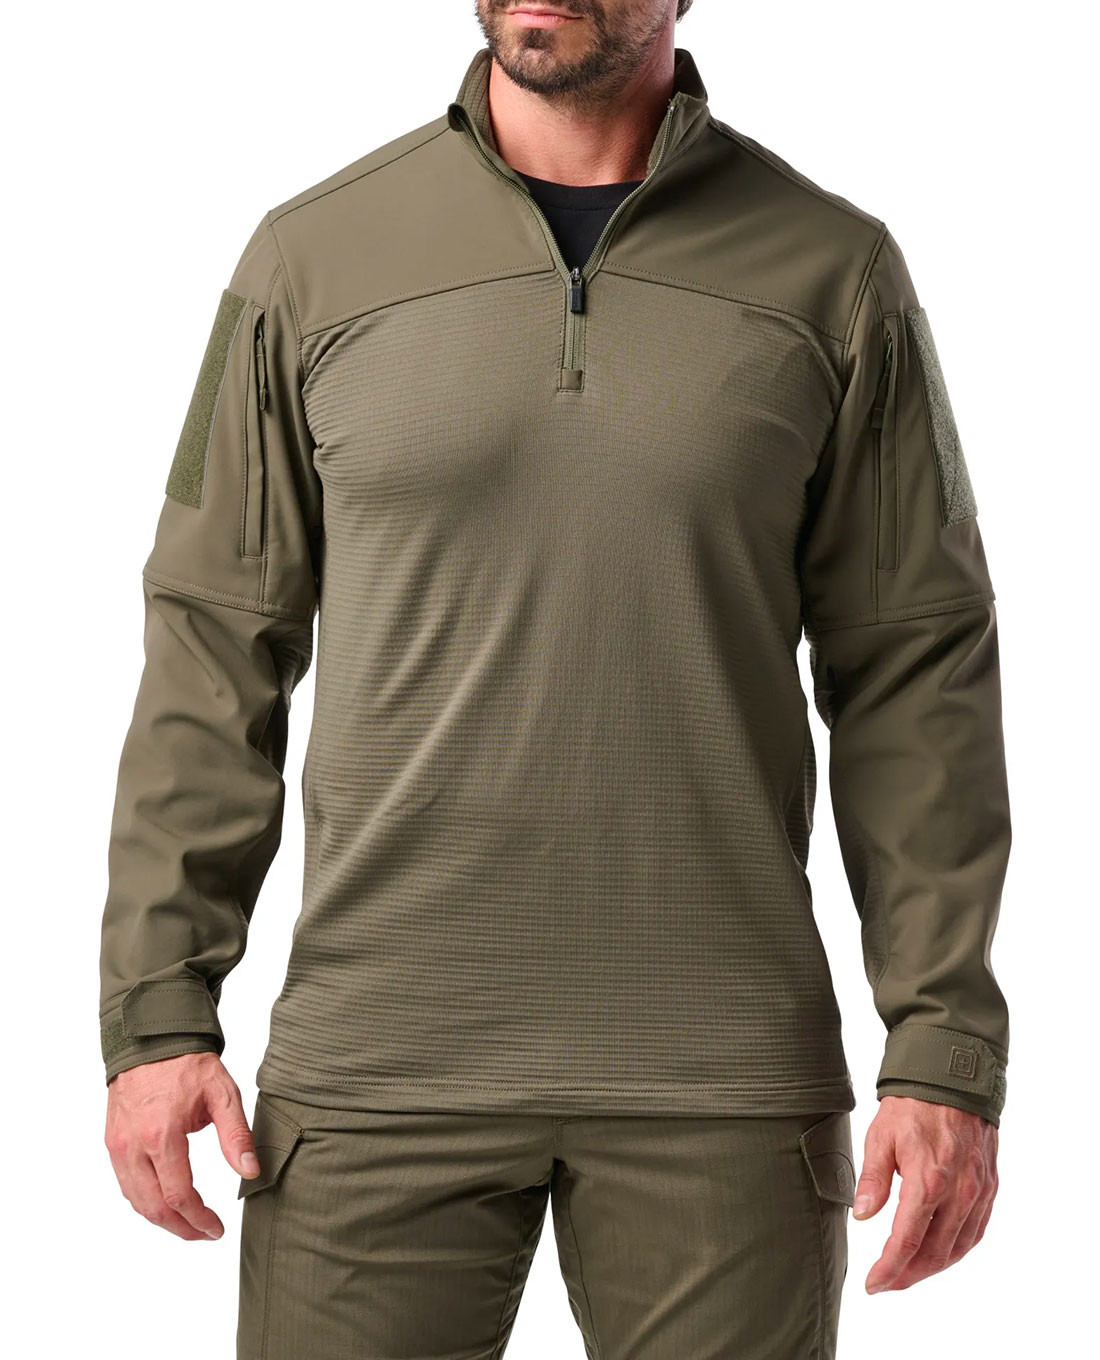 https://www.tacwrk.com/img/102237/511-tactical-cold-weather-rapid-ops-shirt-ranger-green-72540186-4.jpg?options=rs:fill:1100:1360/g:ce/dpr:1